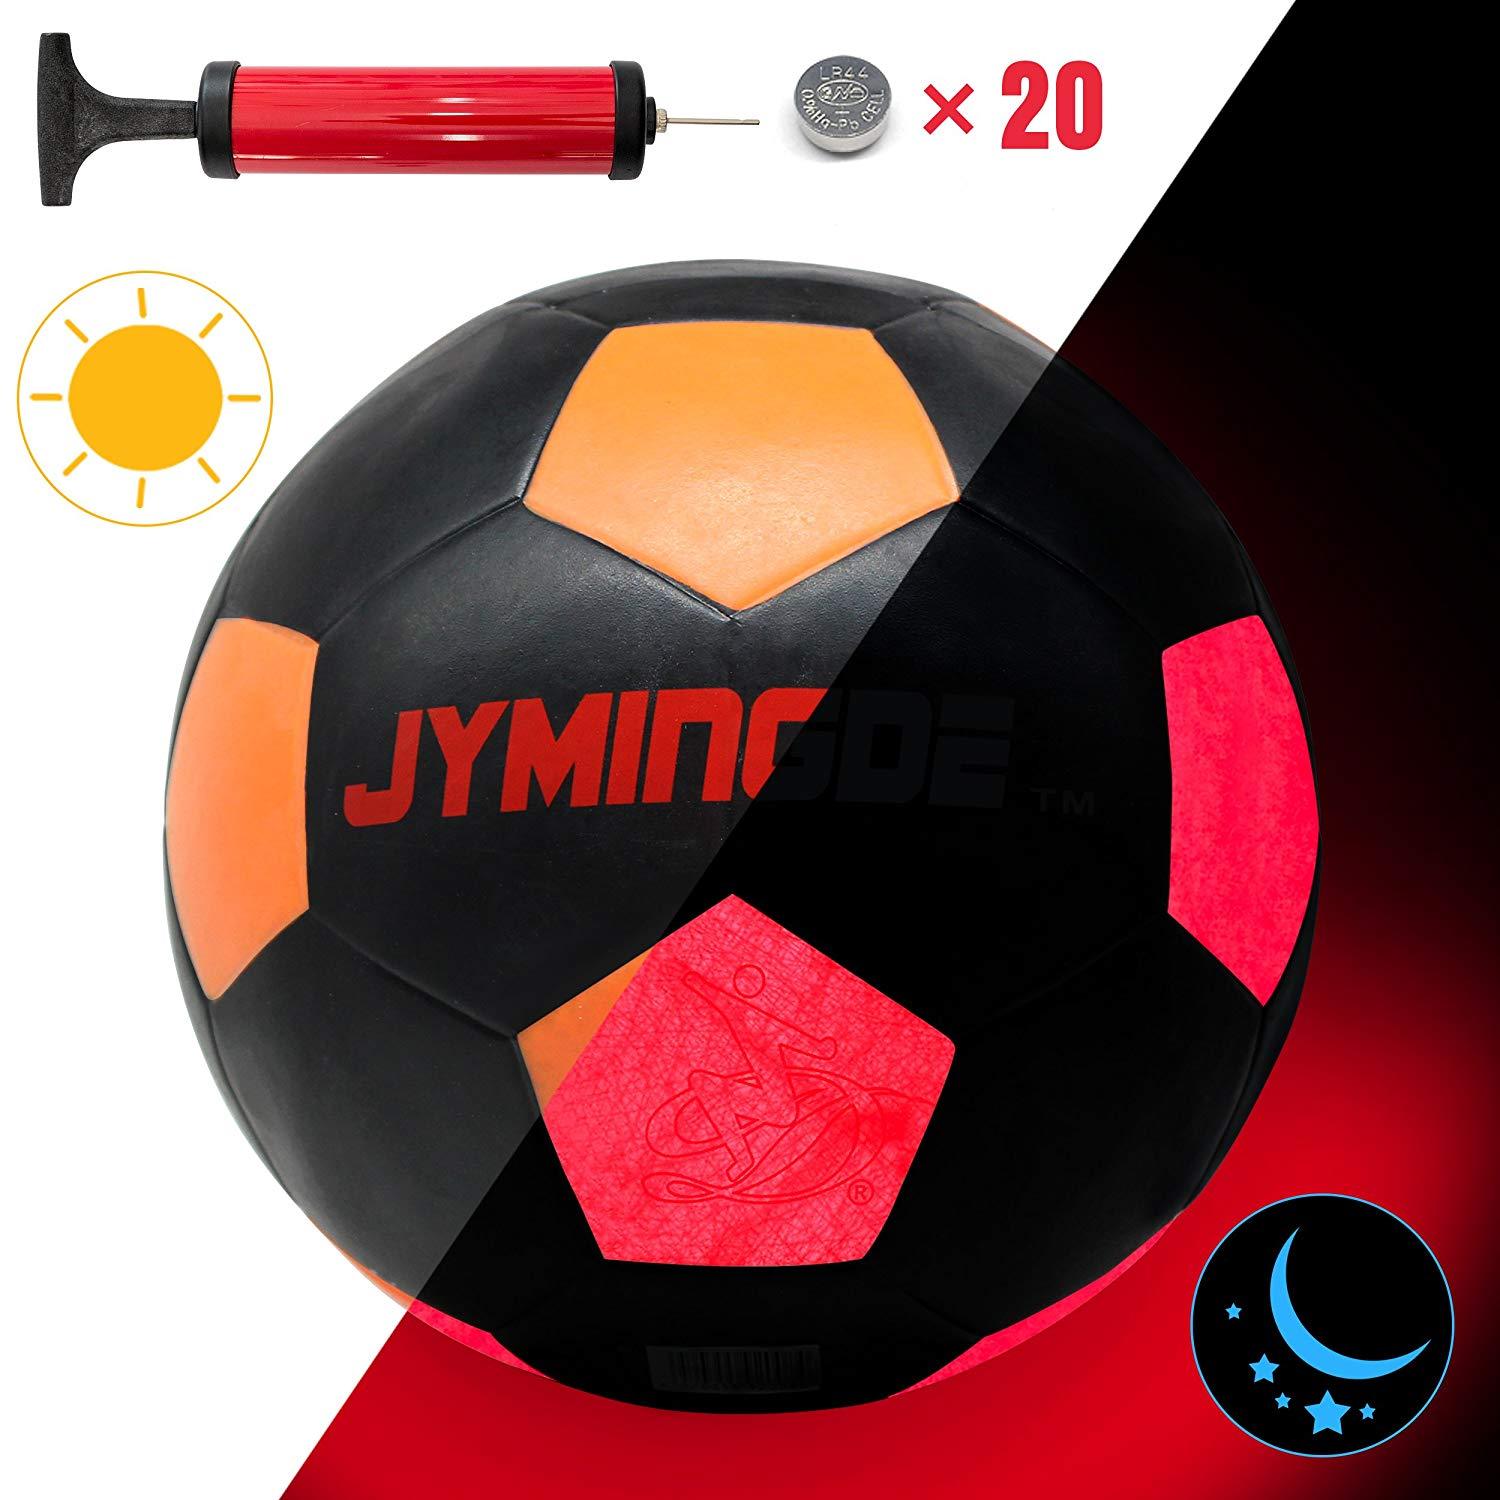 LED Football with accessories